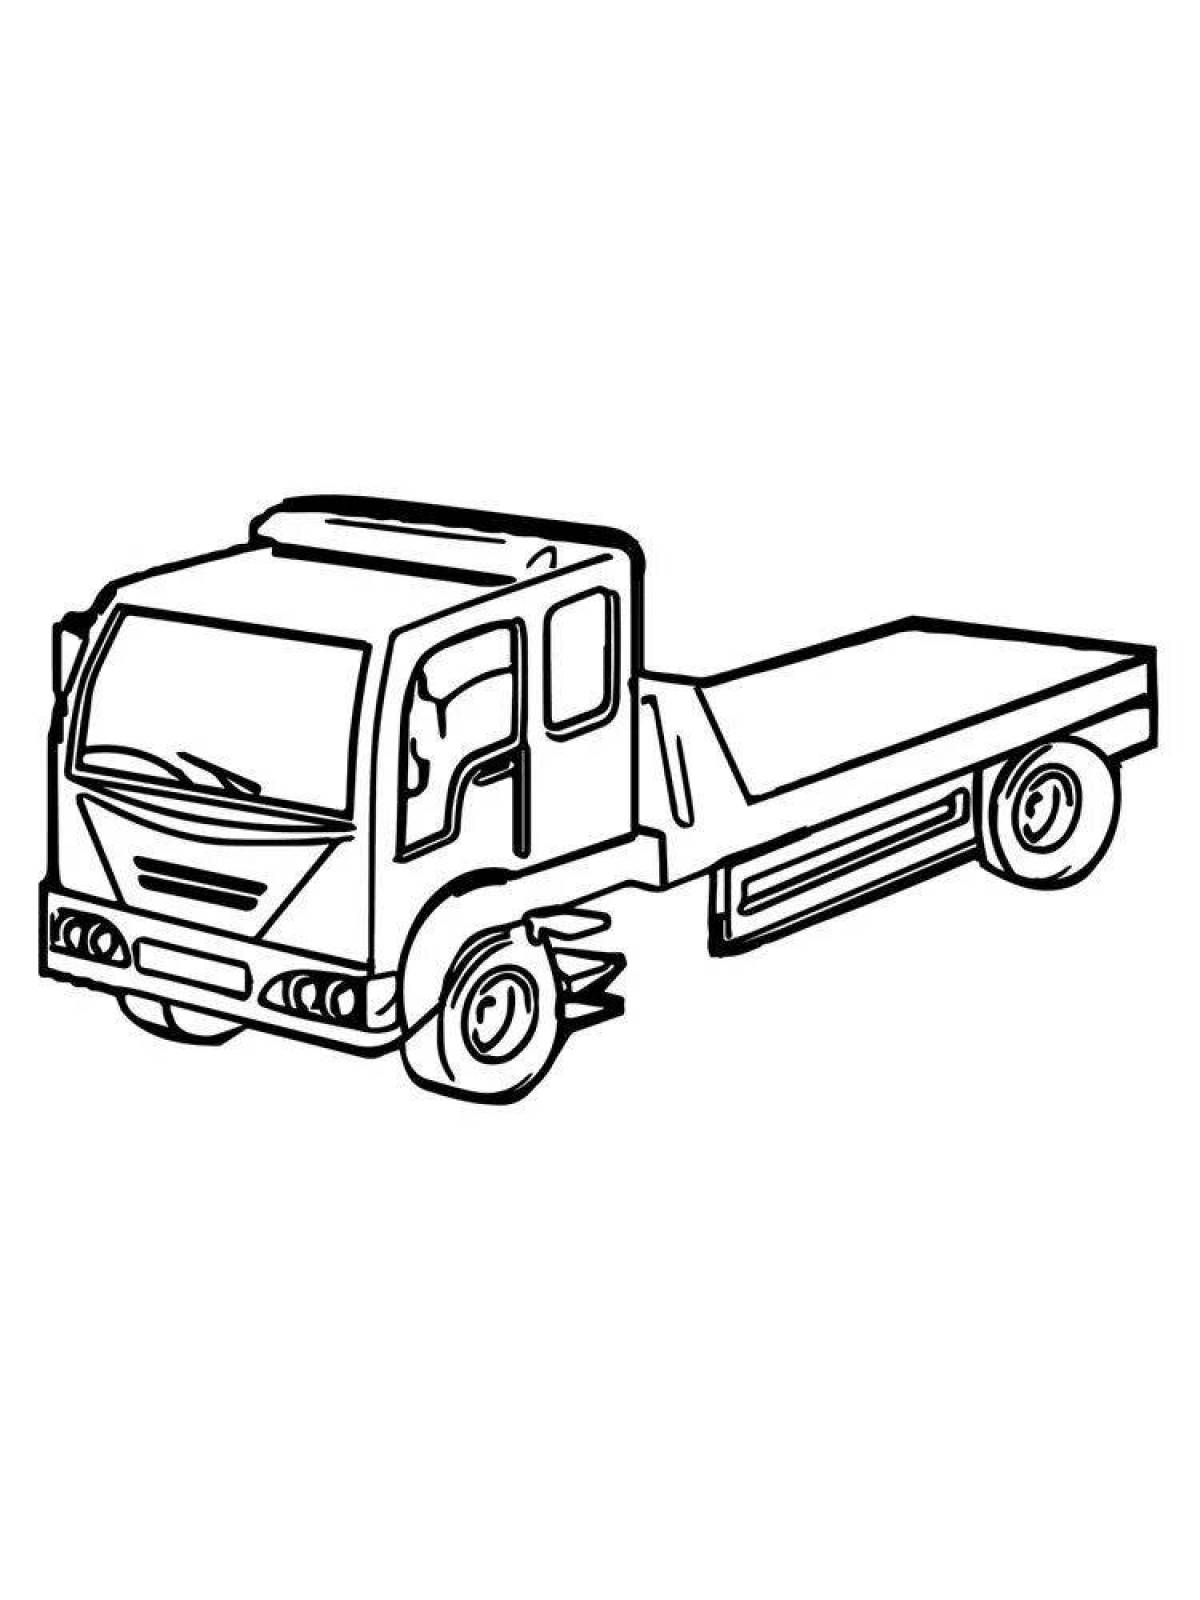 Colorful Tow Truck Coloring Page for Toddlers